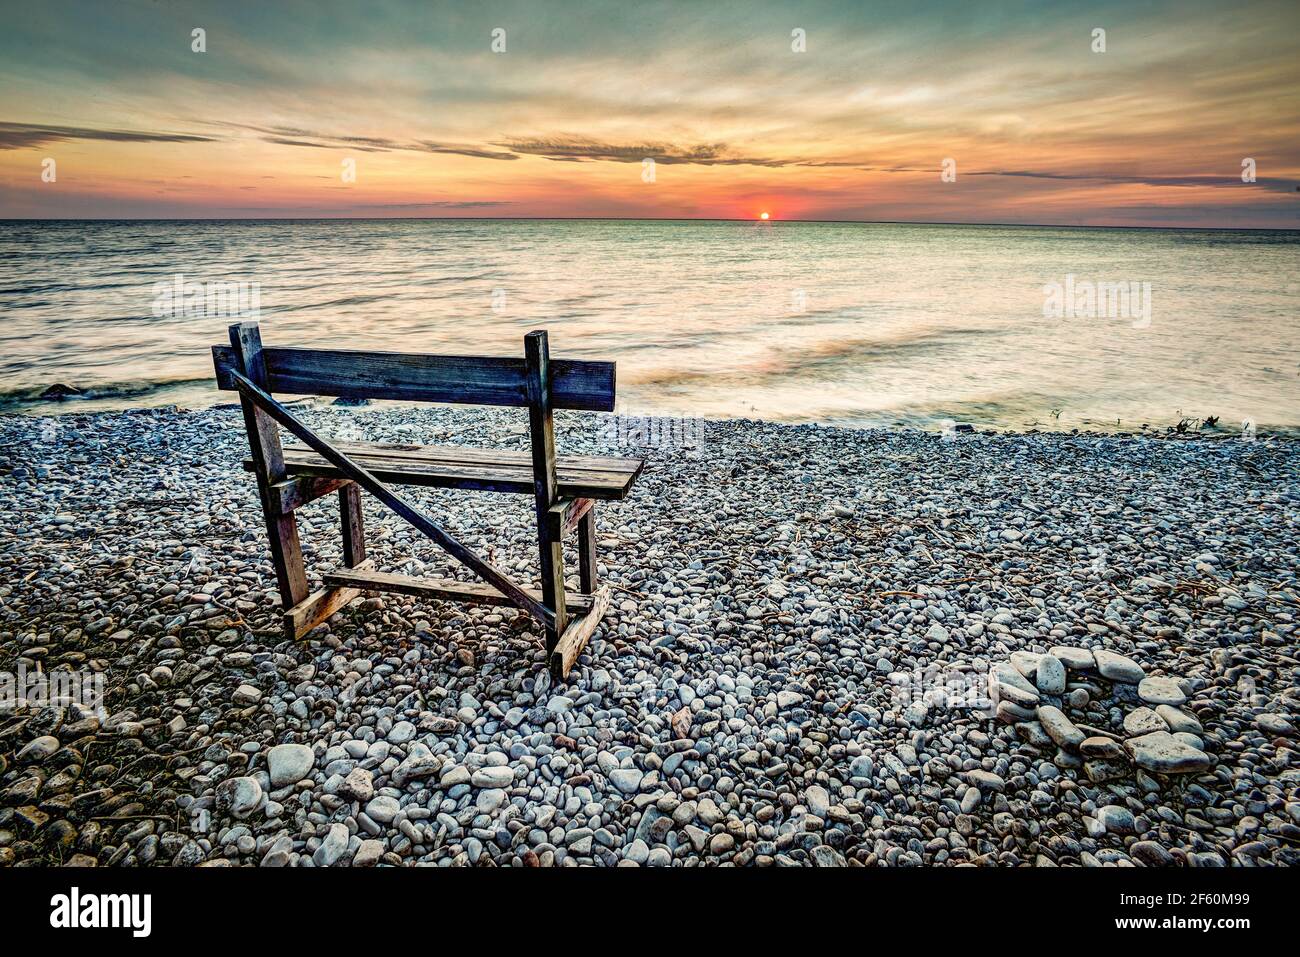 An empty bench watch's a warm spring sunset on the bay of Green Bay located on the door country peninsula in Wisconsin. A popular tourist destination Stock Photo